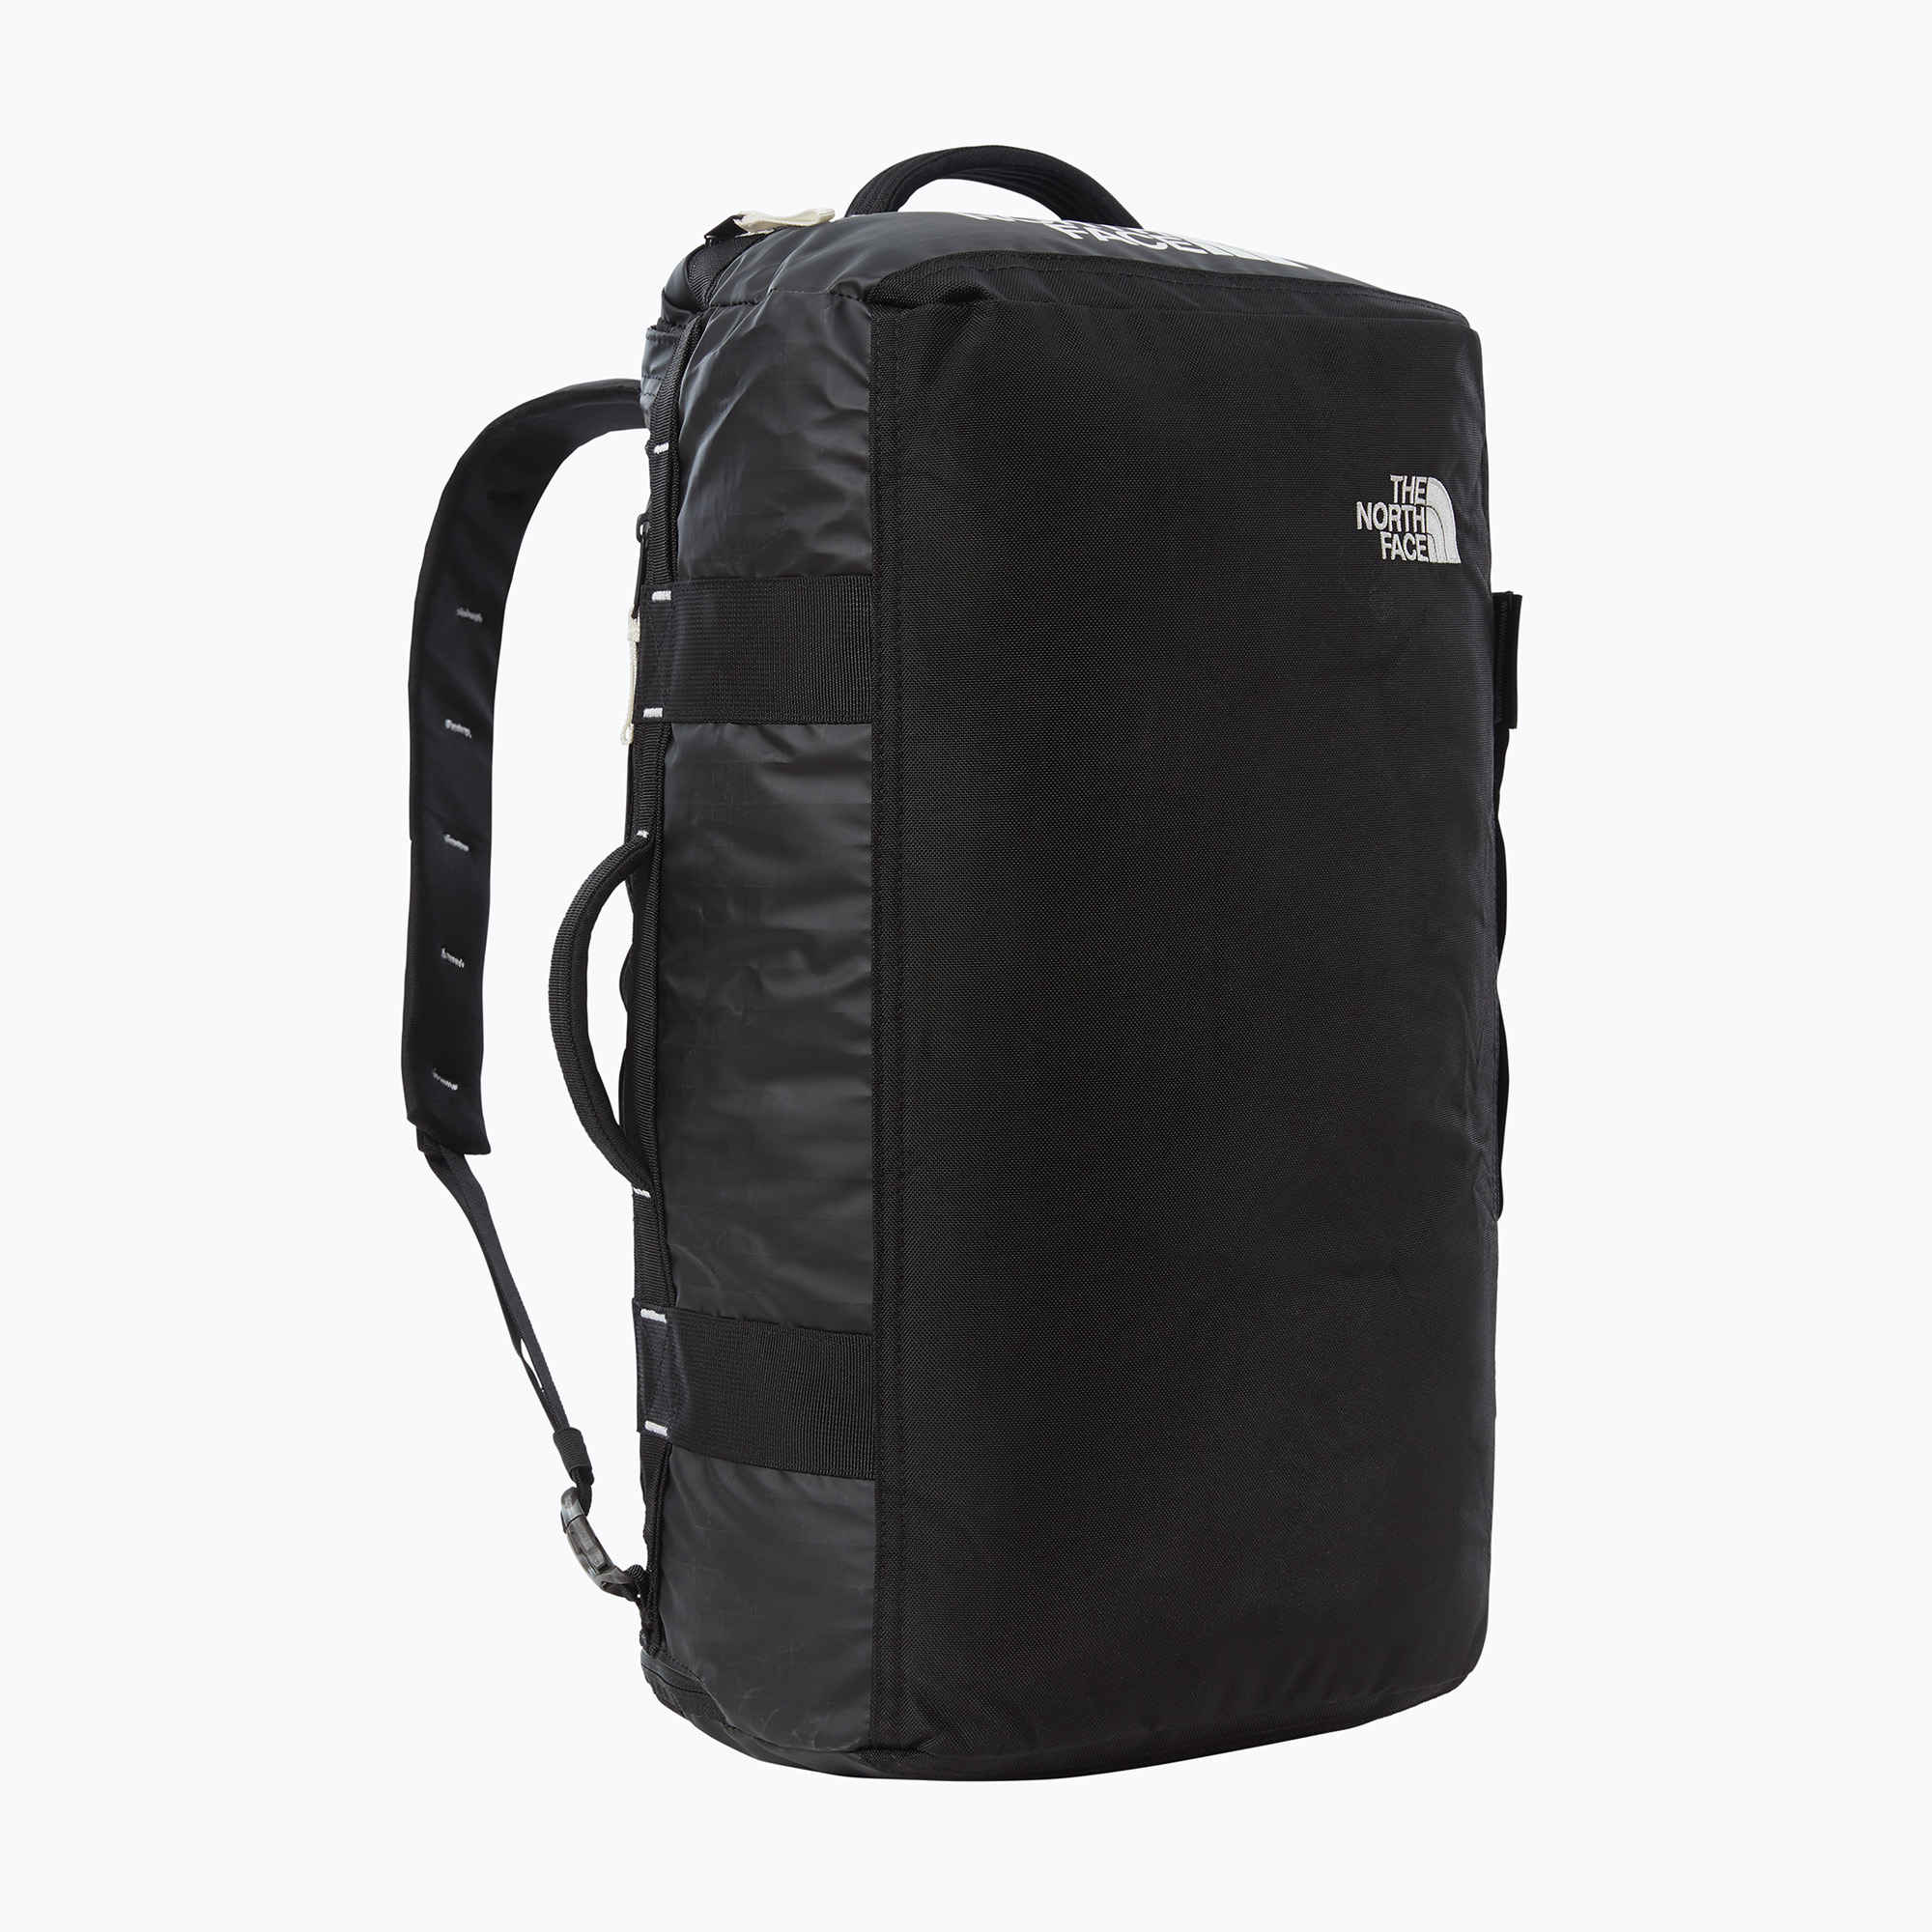 The North Face Base Camp Voyager Duffel 32 л черна/бяла пътна чанта